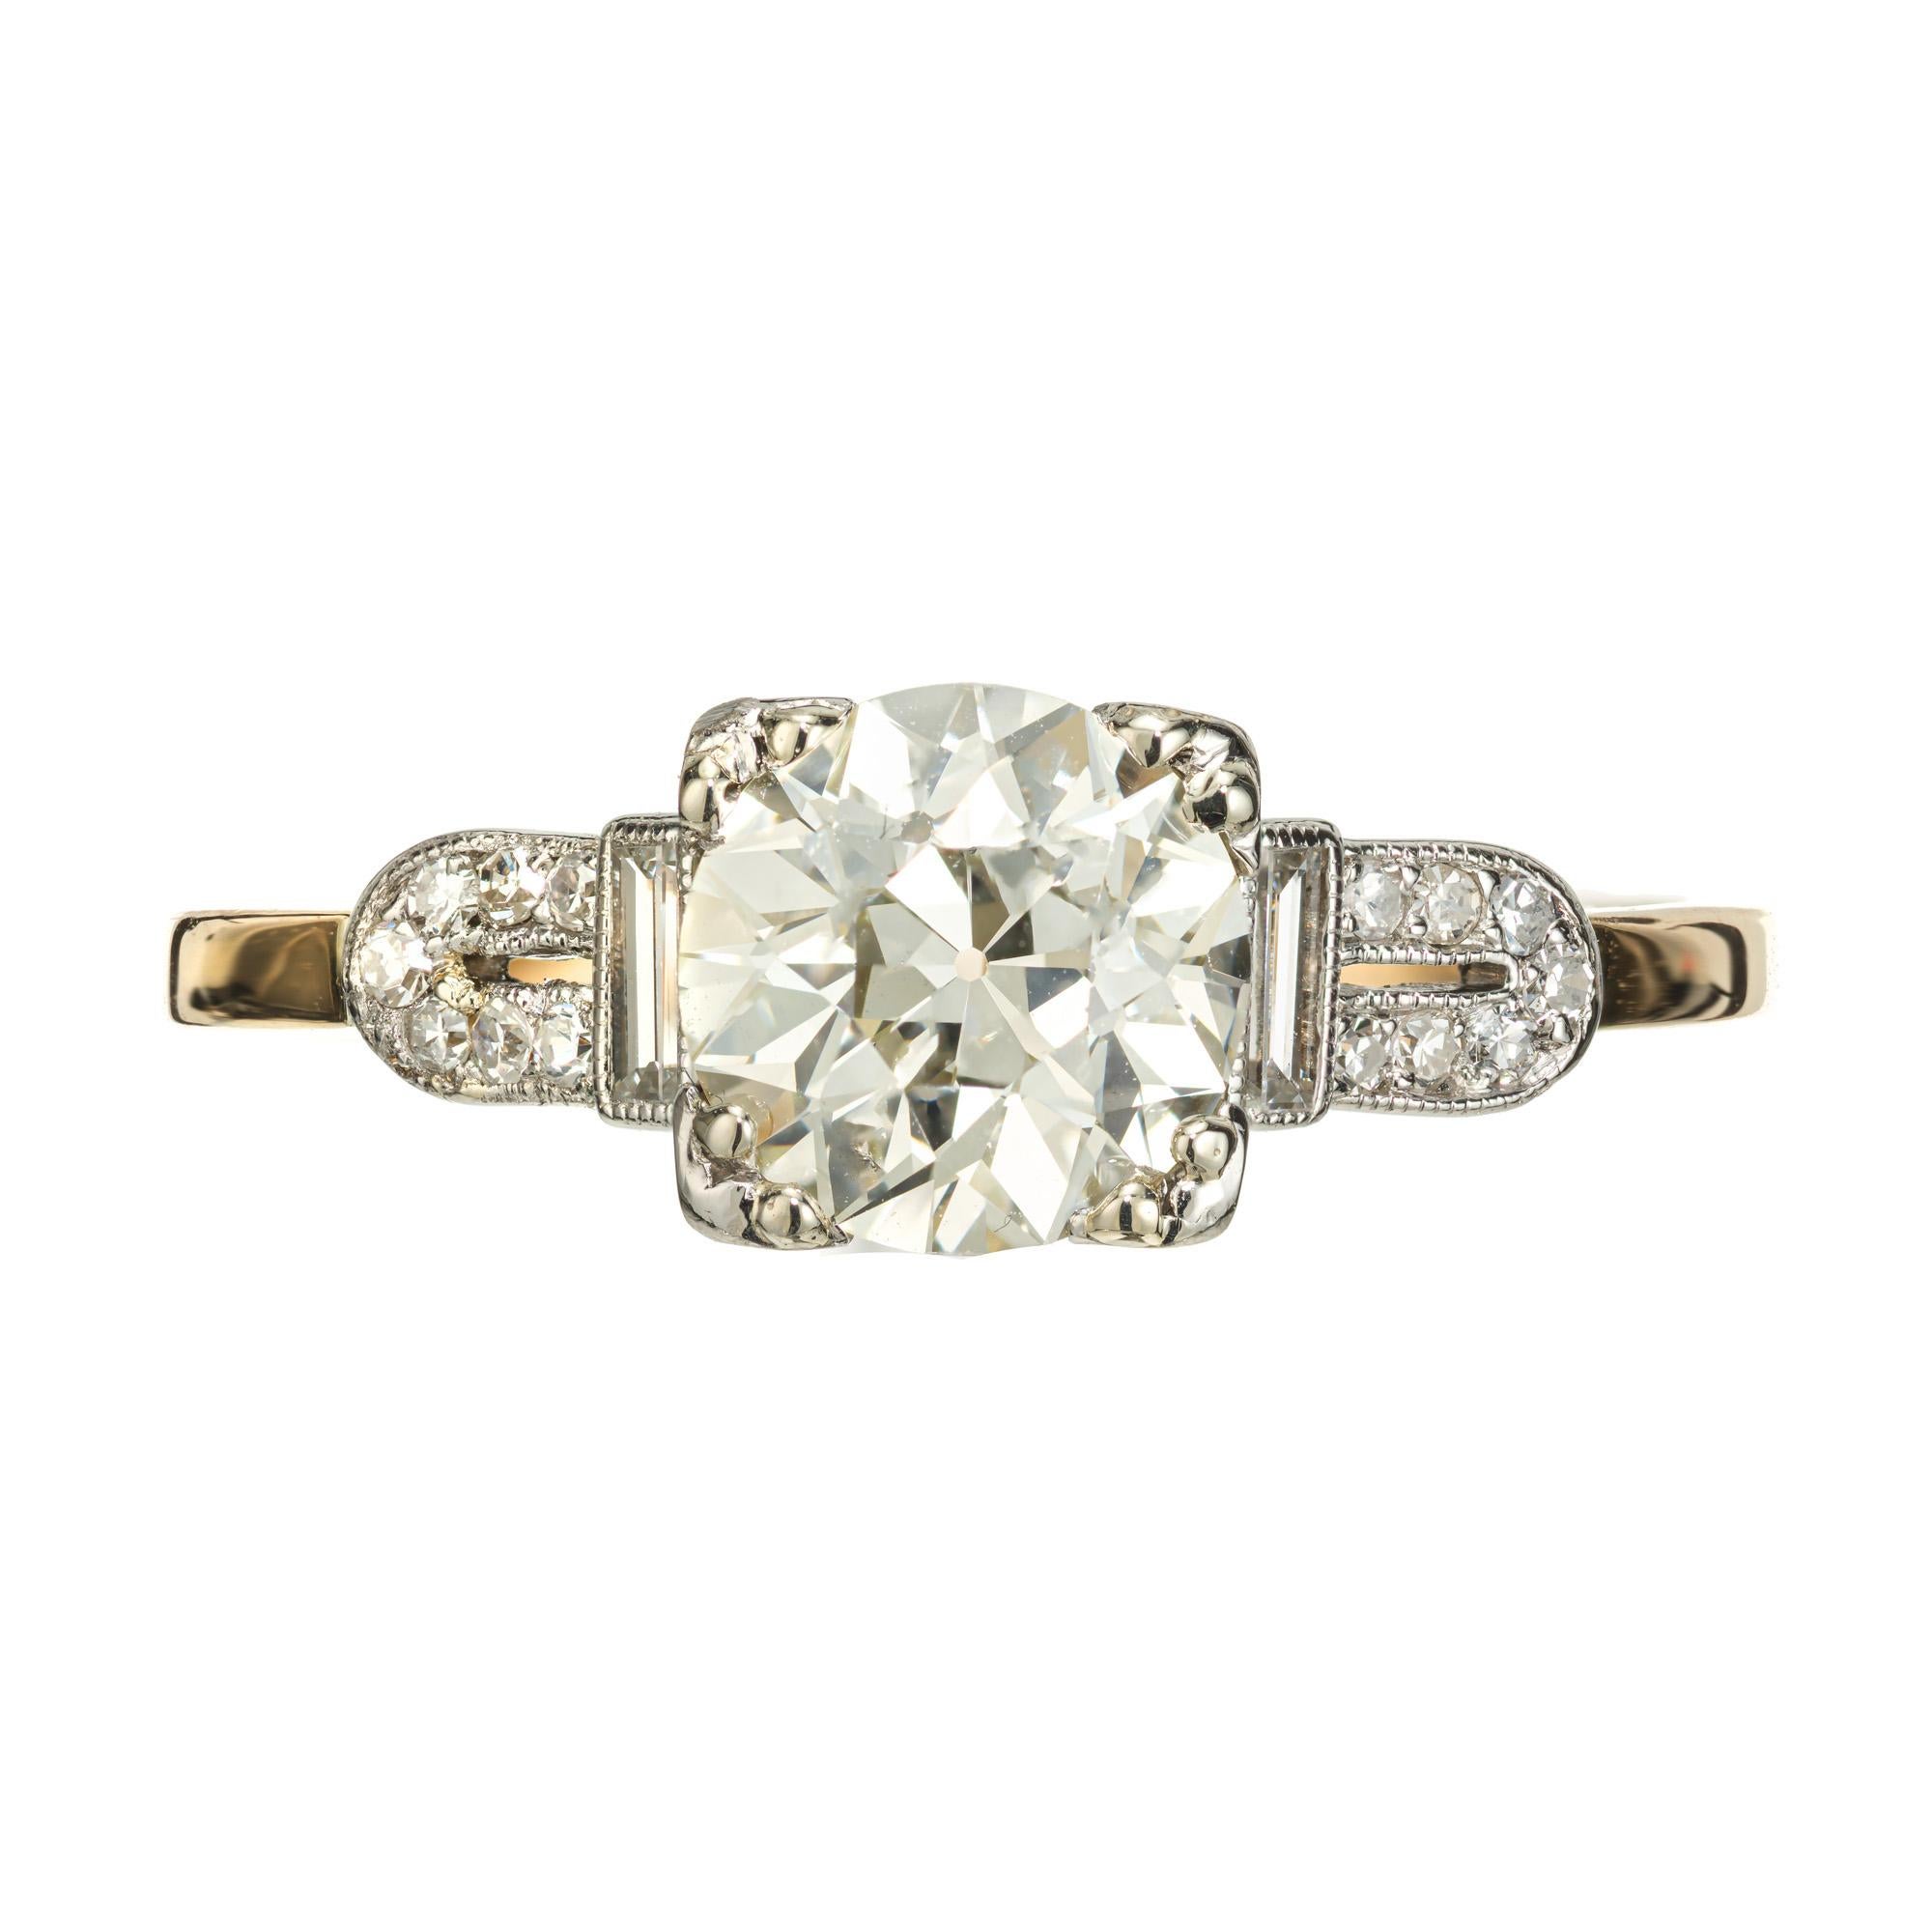 Original 1920's Art Deco old European cut 1.39 carat diamond engagement ring. GIA certified Old European cut diamond center stone in a platinum handmade crown and 14k yellow gold shank with 2 side baguette diamonds and 14 single cut round diamonds.